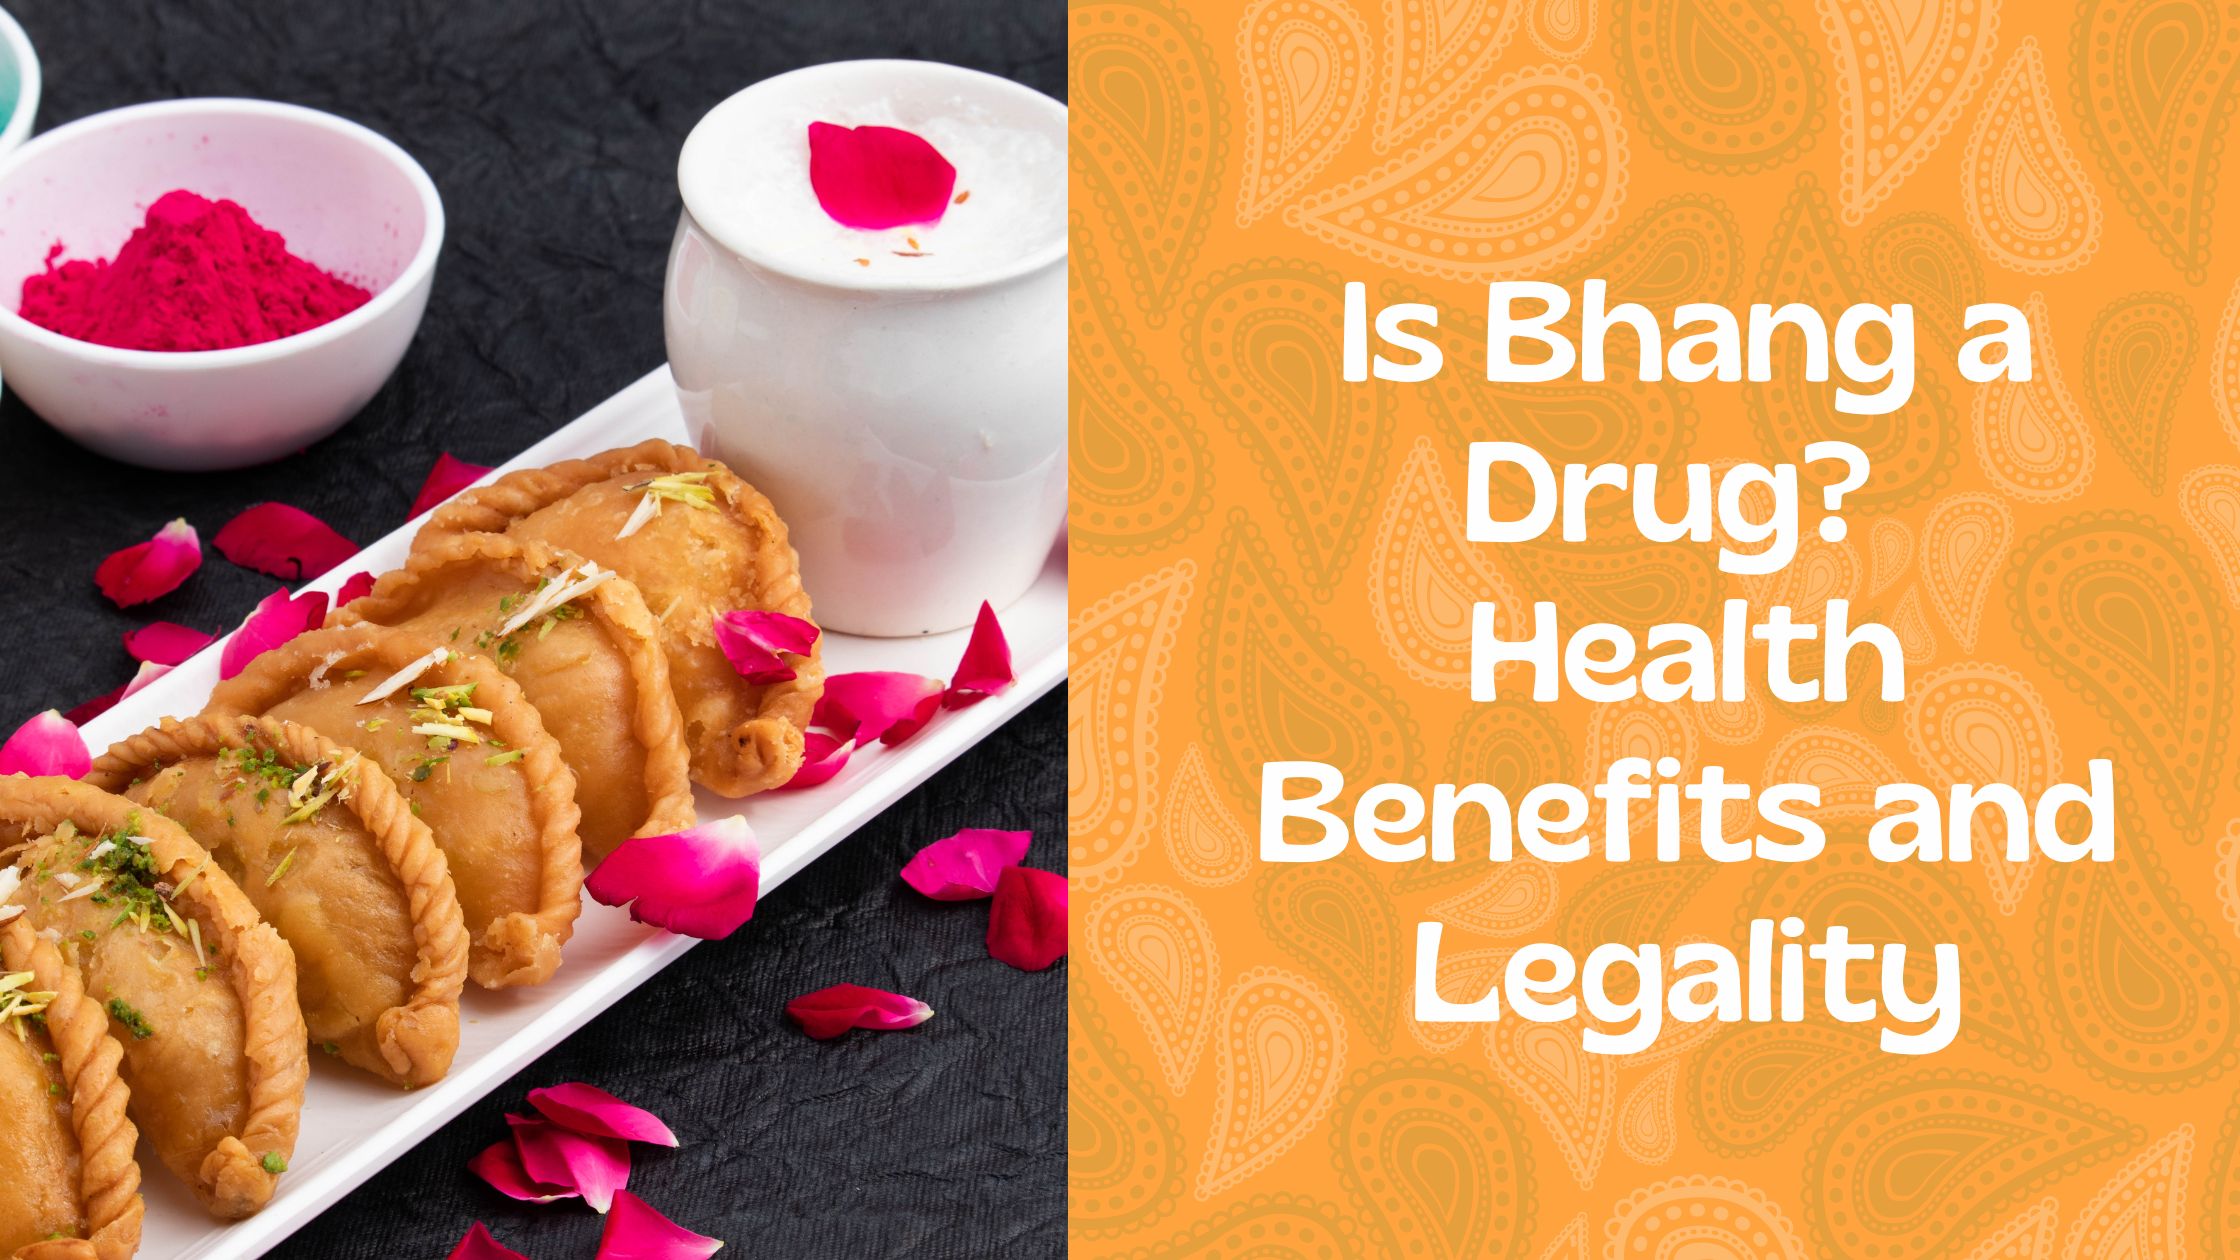 Is Bhang a Drug? Health Benefits and Legality